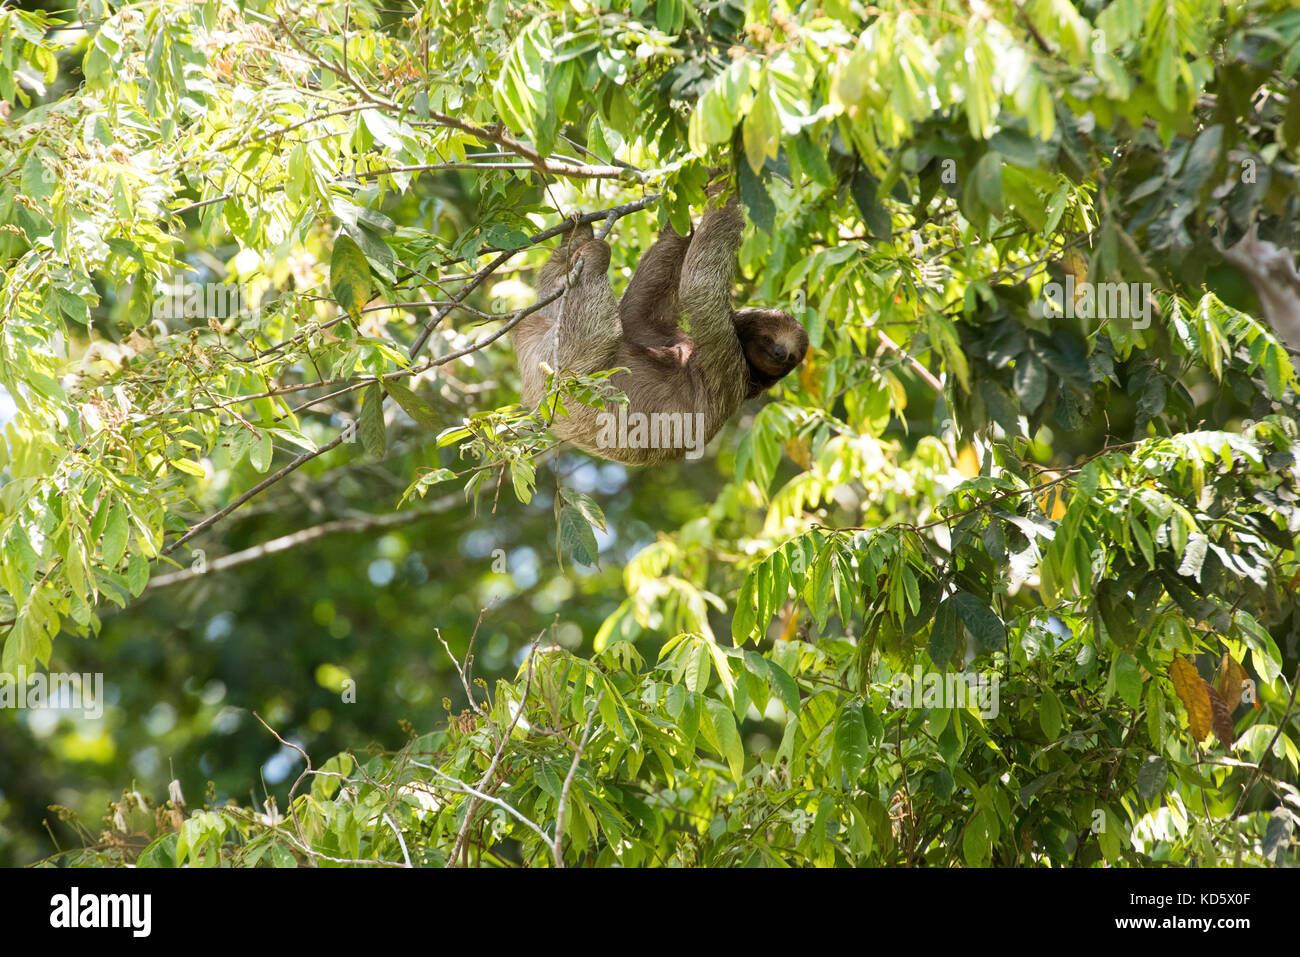 Three-toed sloth hanging in a tree, Costa Rica Stock Photo